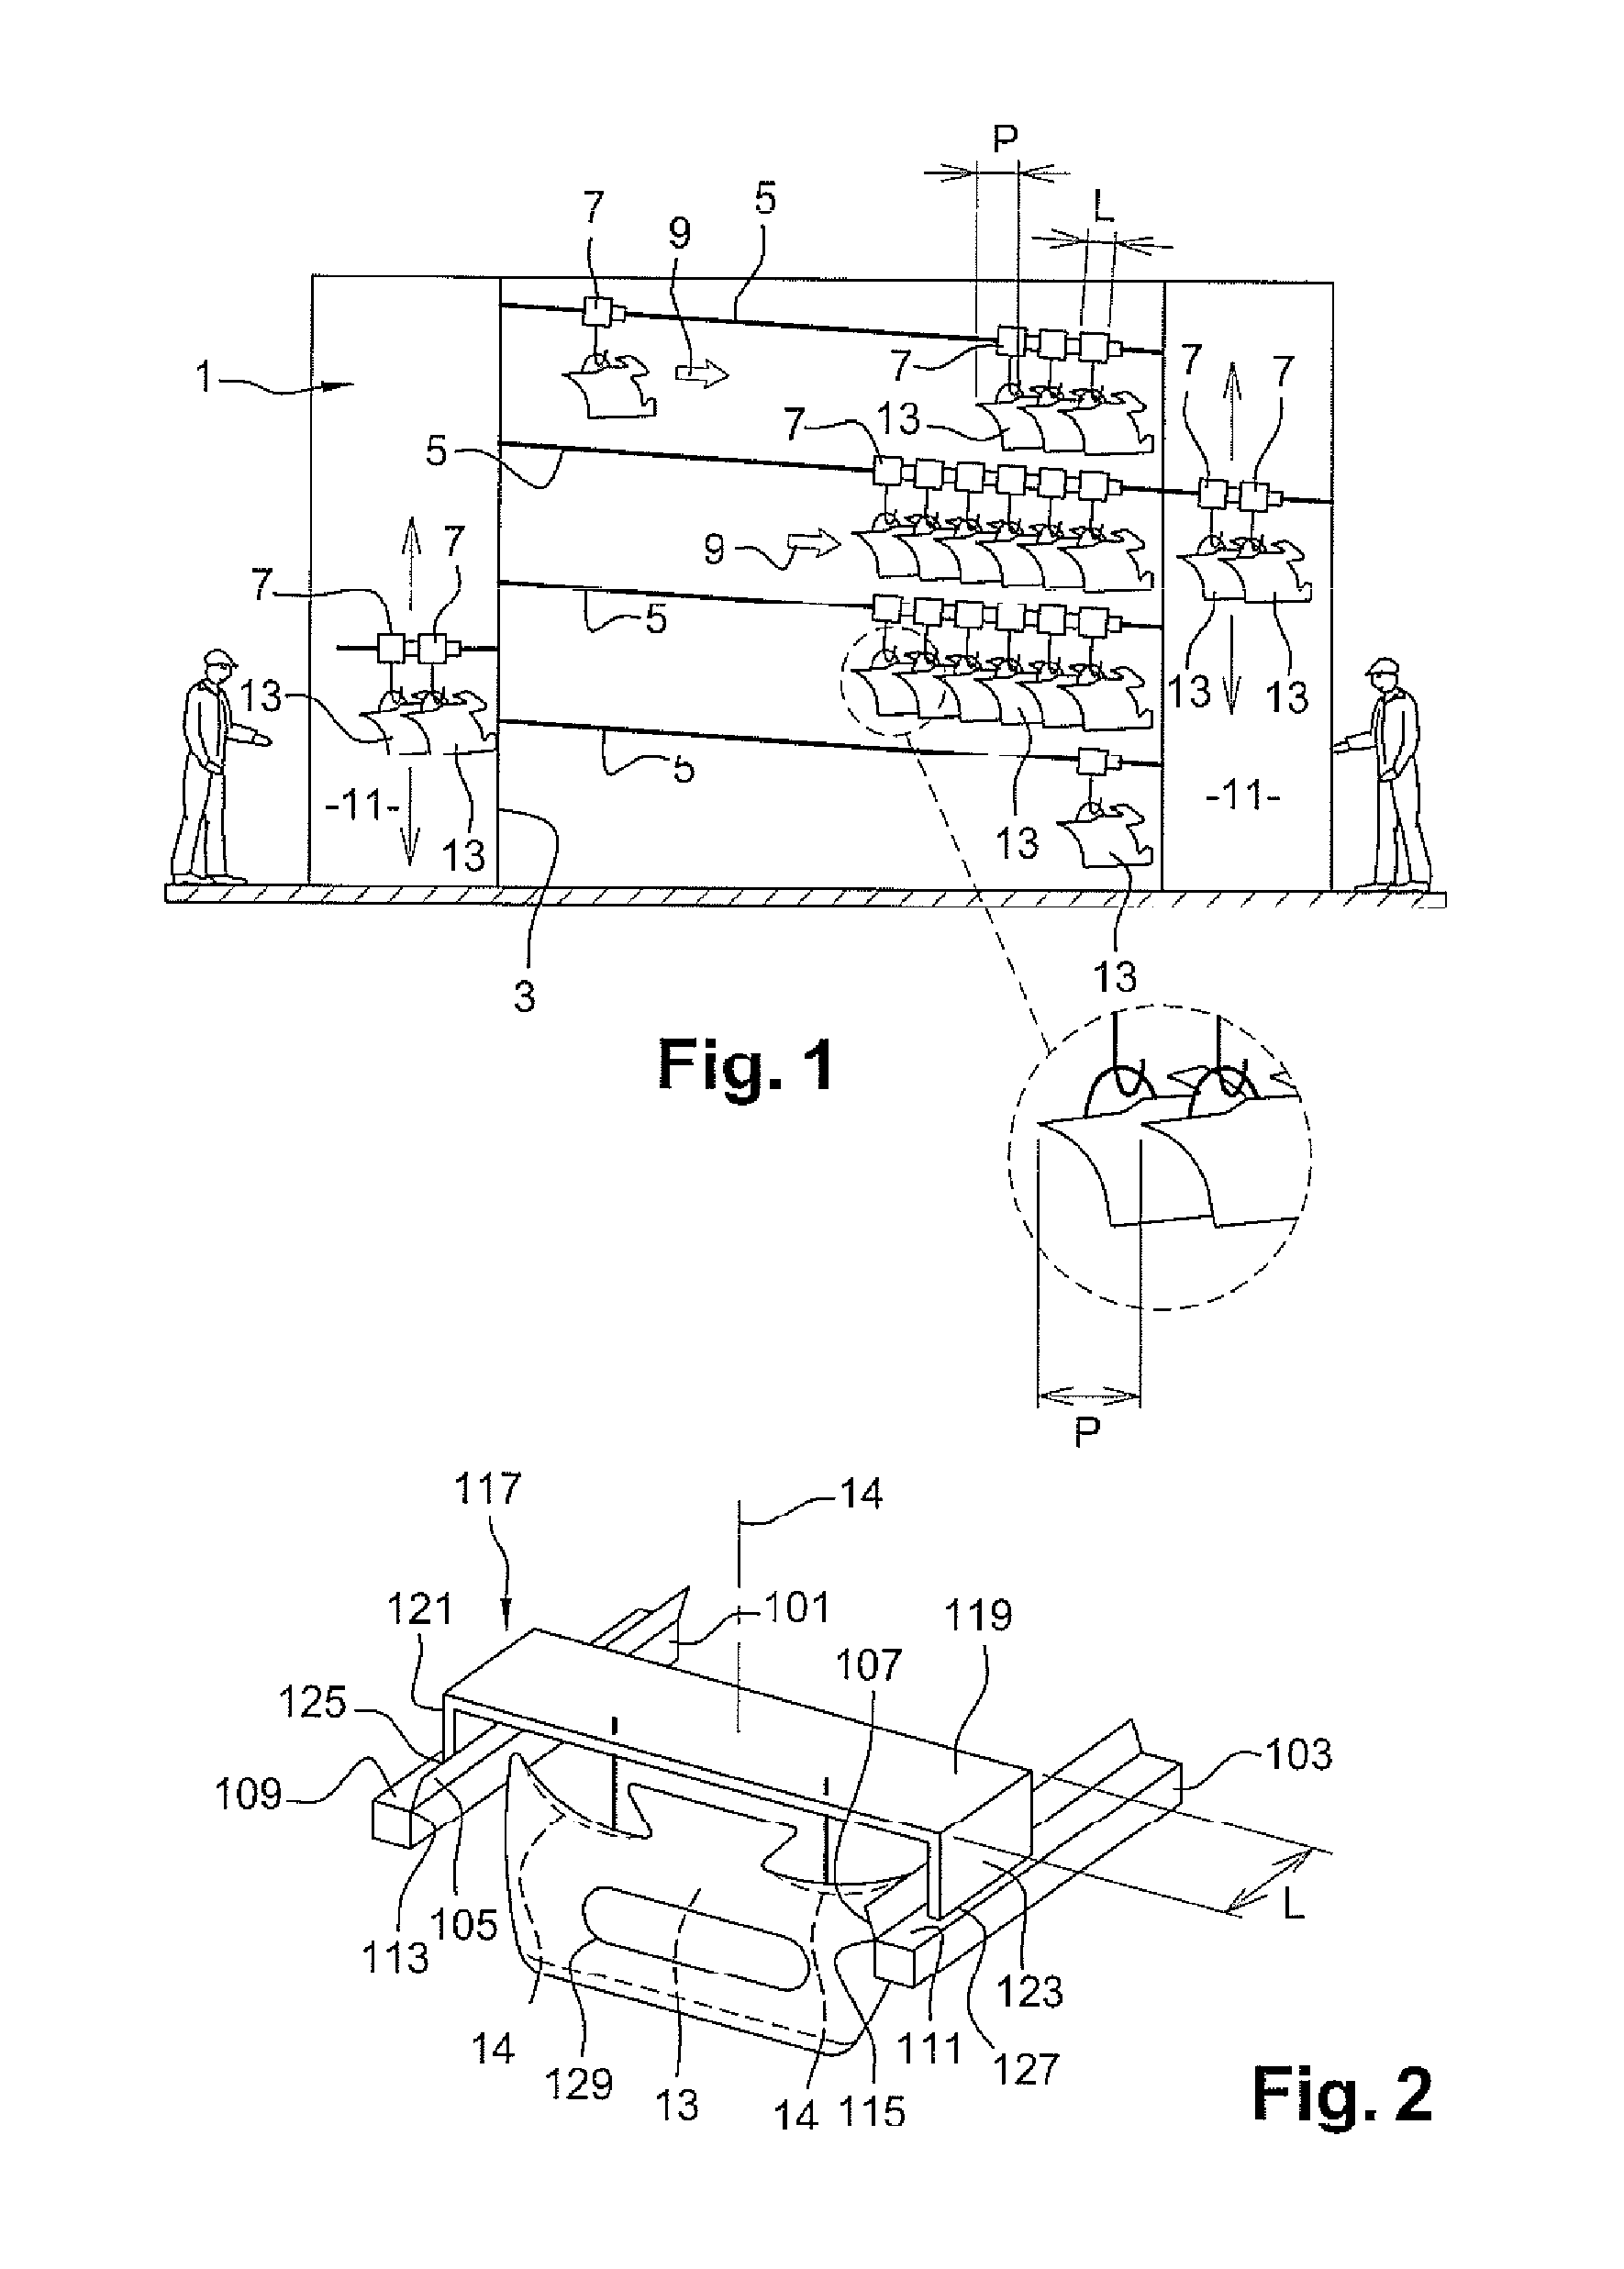 Static temporary storage device for motor vehicle body parts